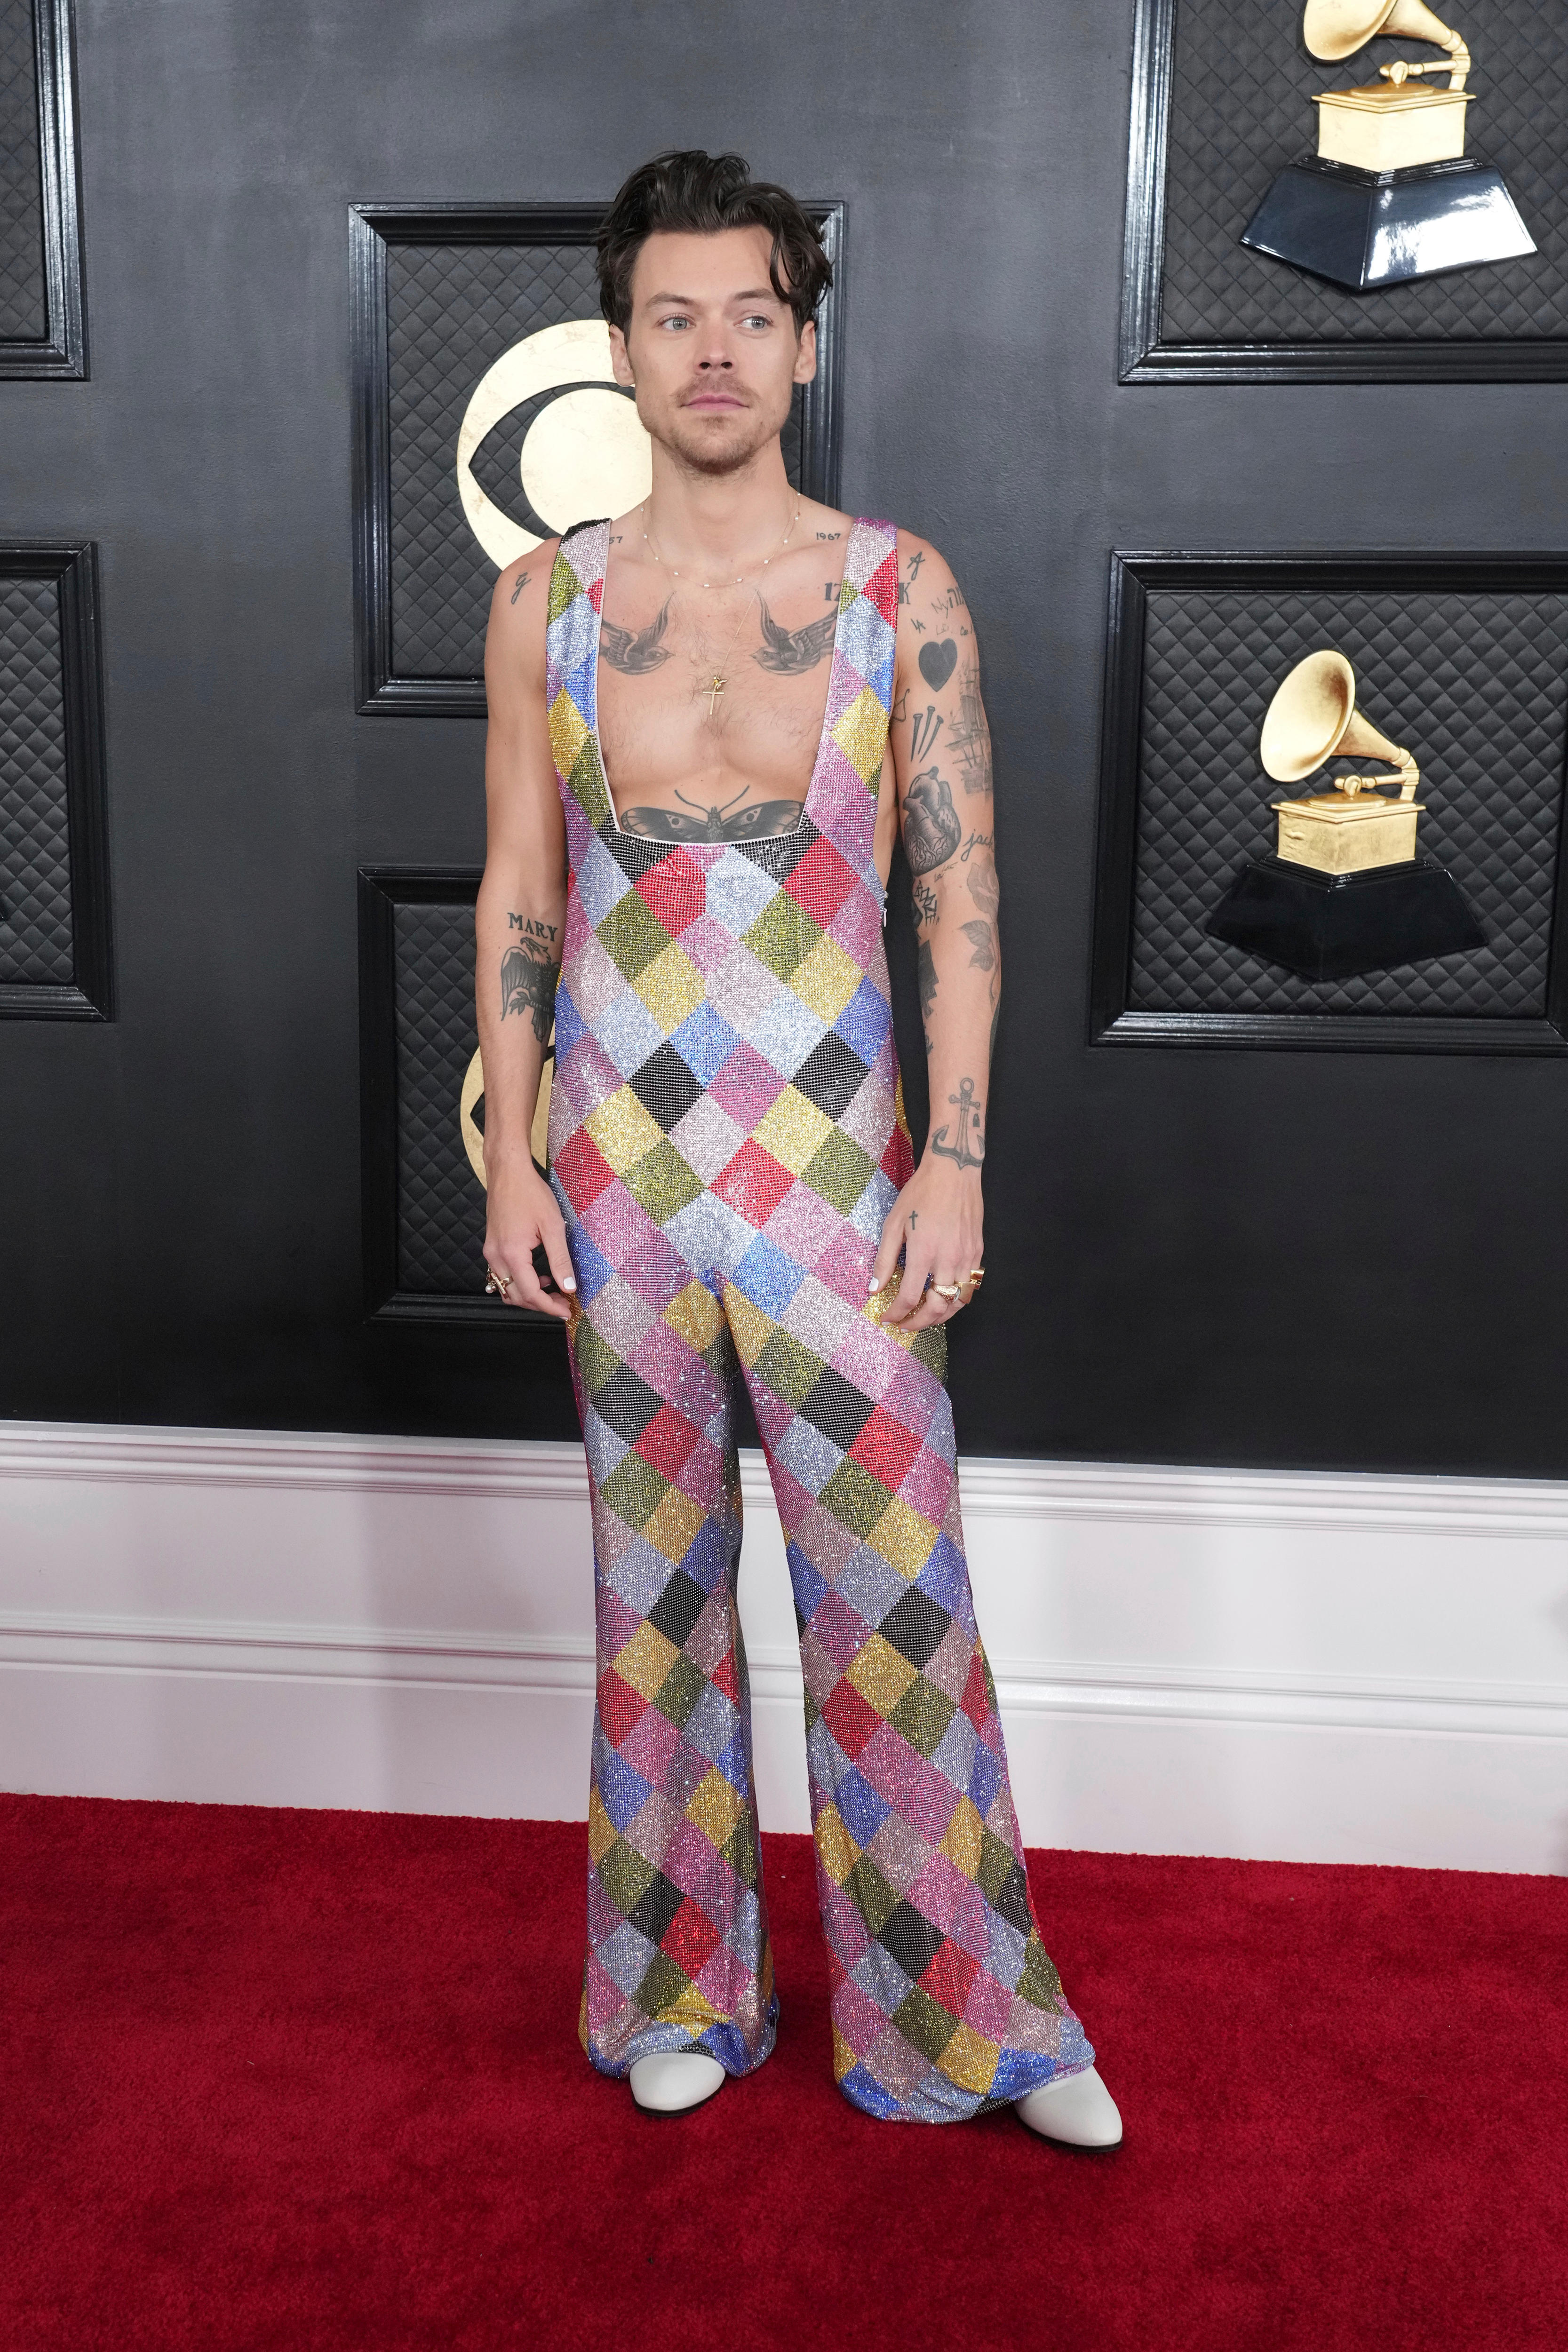 Harry Styles at the 2023 Grammy awards